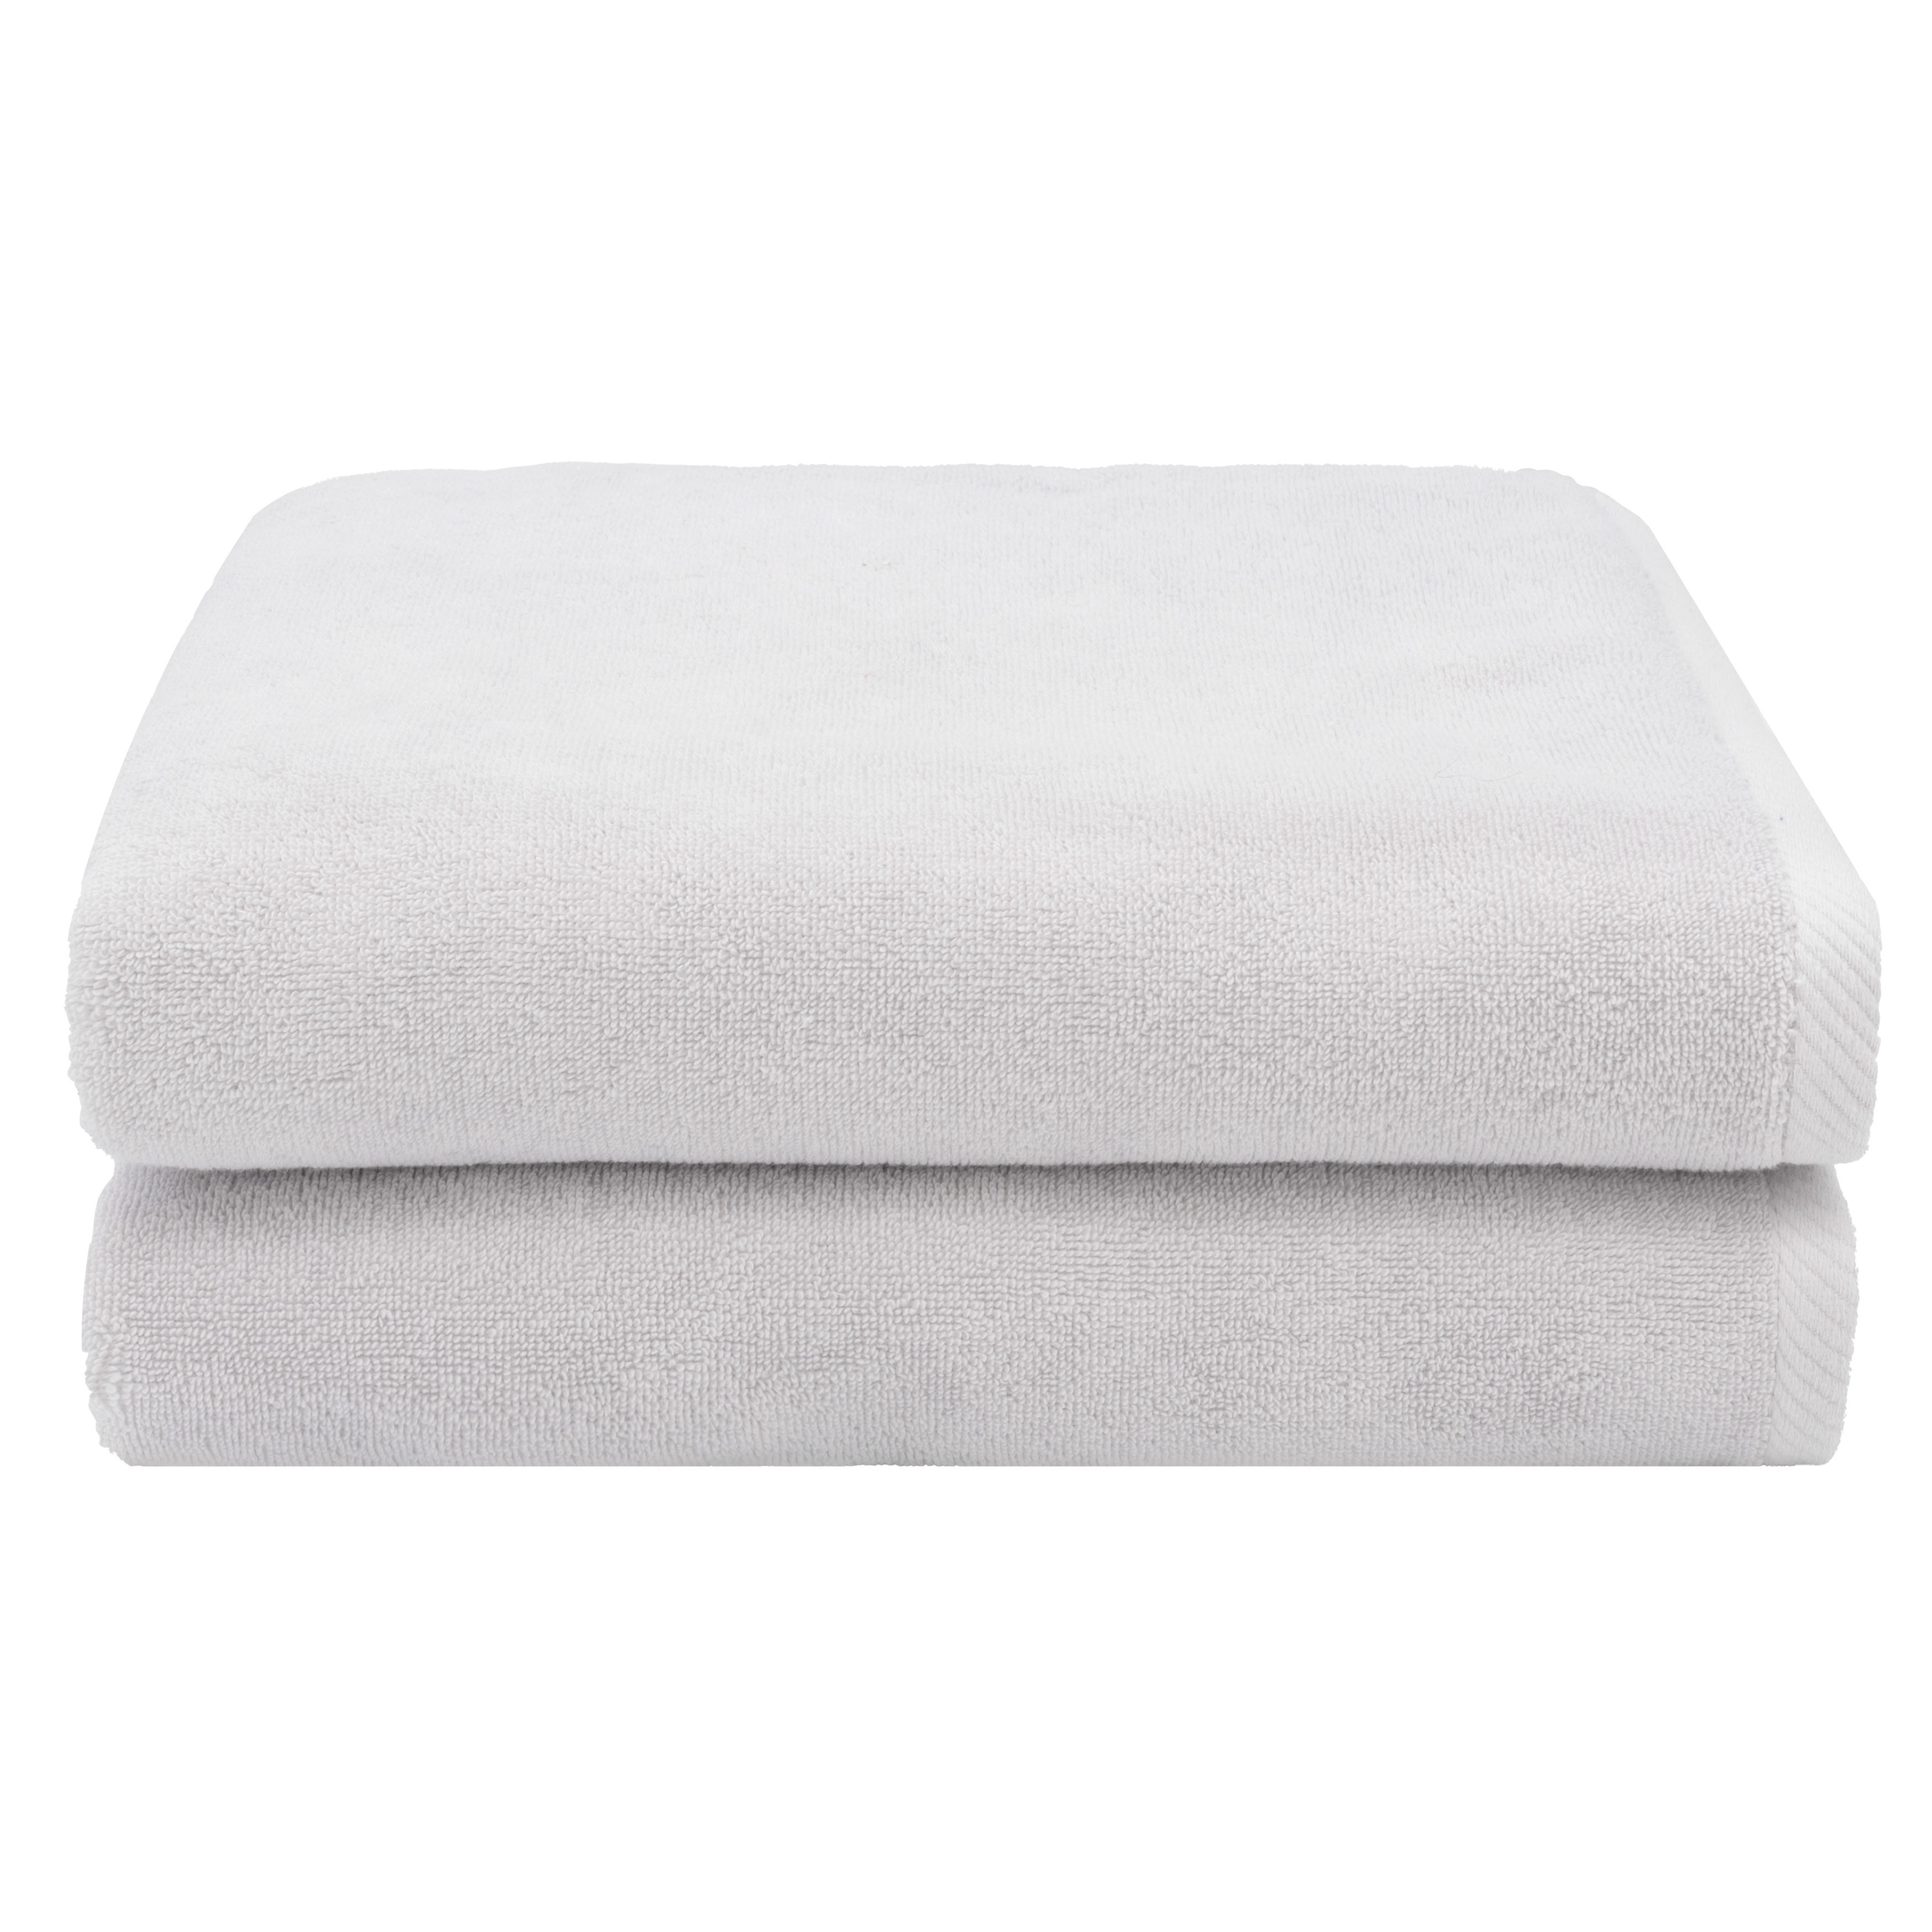 Authentic Hotel and Spa 100% Turkish Cotton Ediree Bath Towels - Set of 2